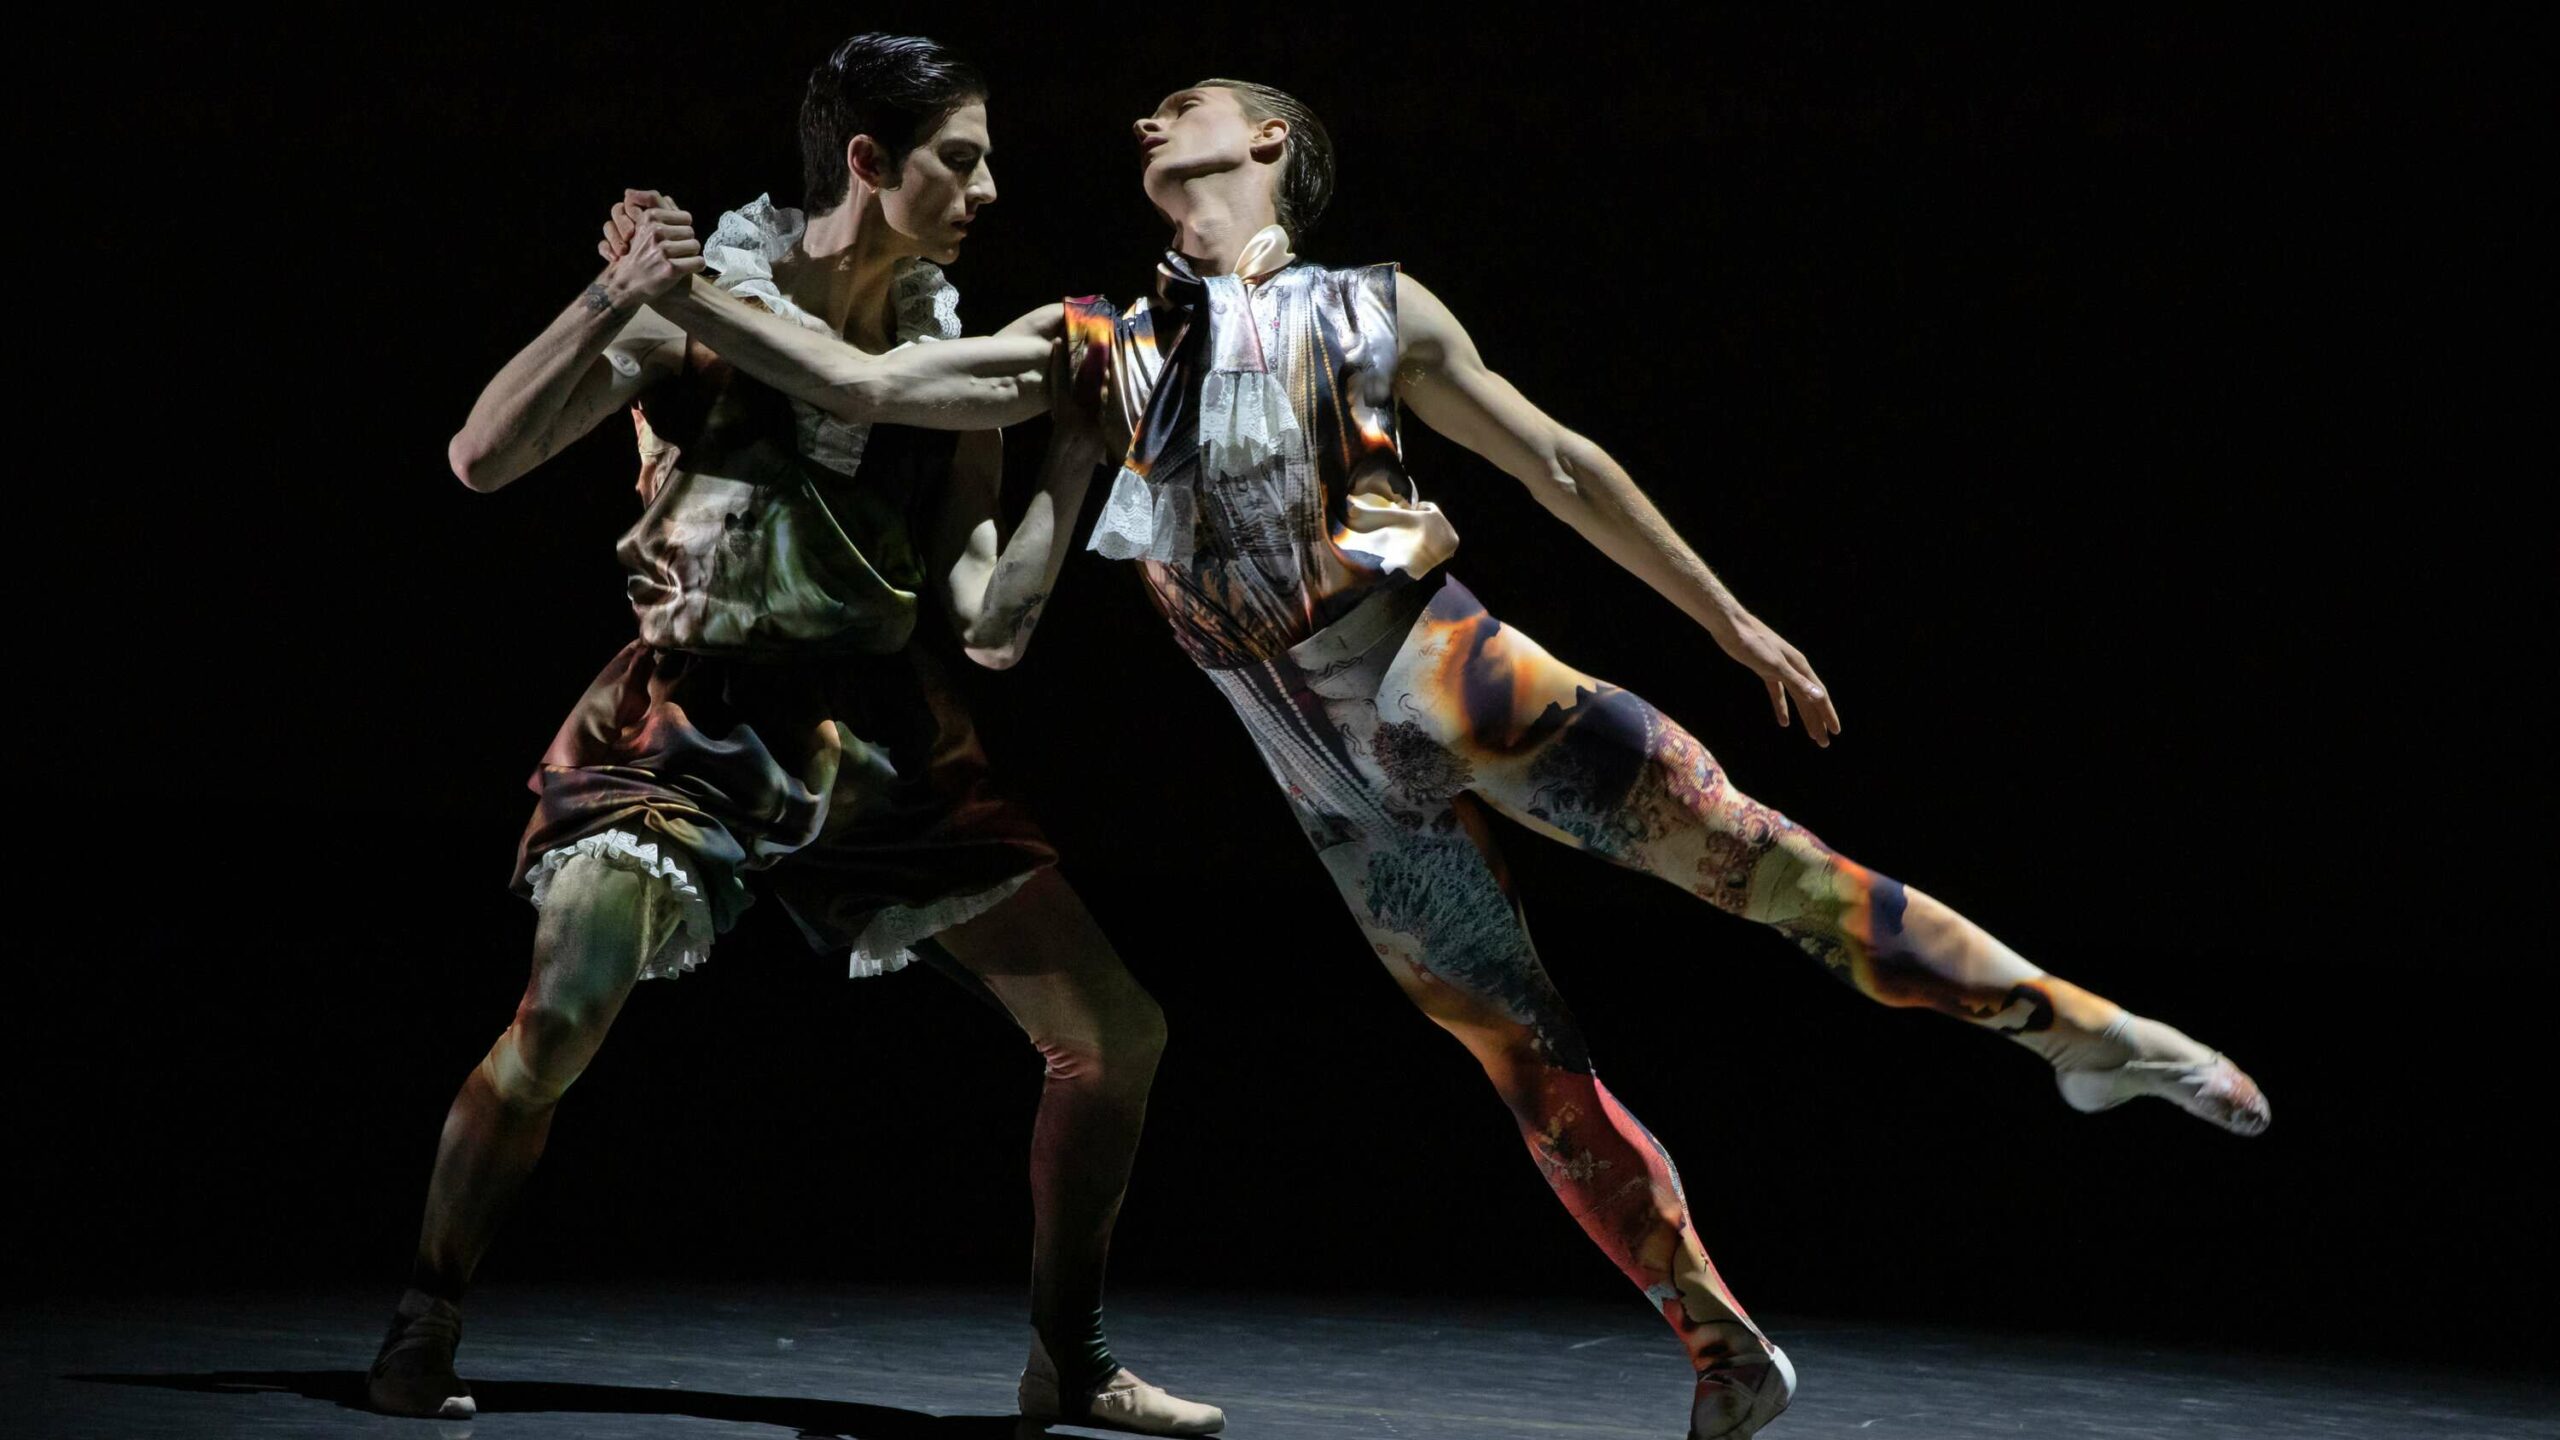 Designs by Giles Deacon at the New York Ballet